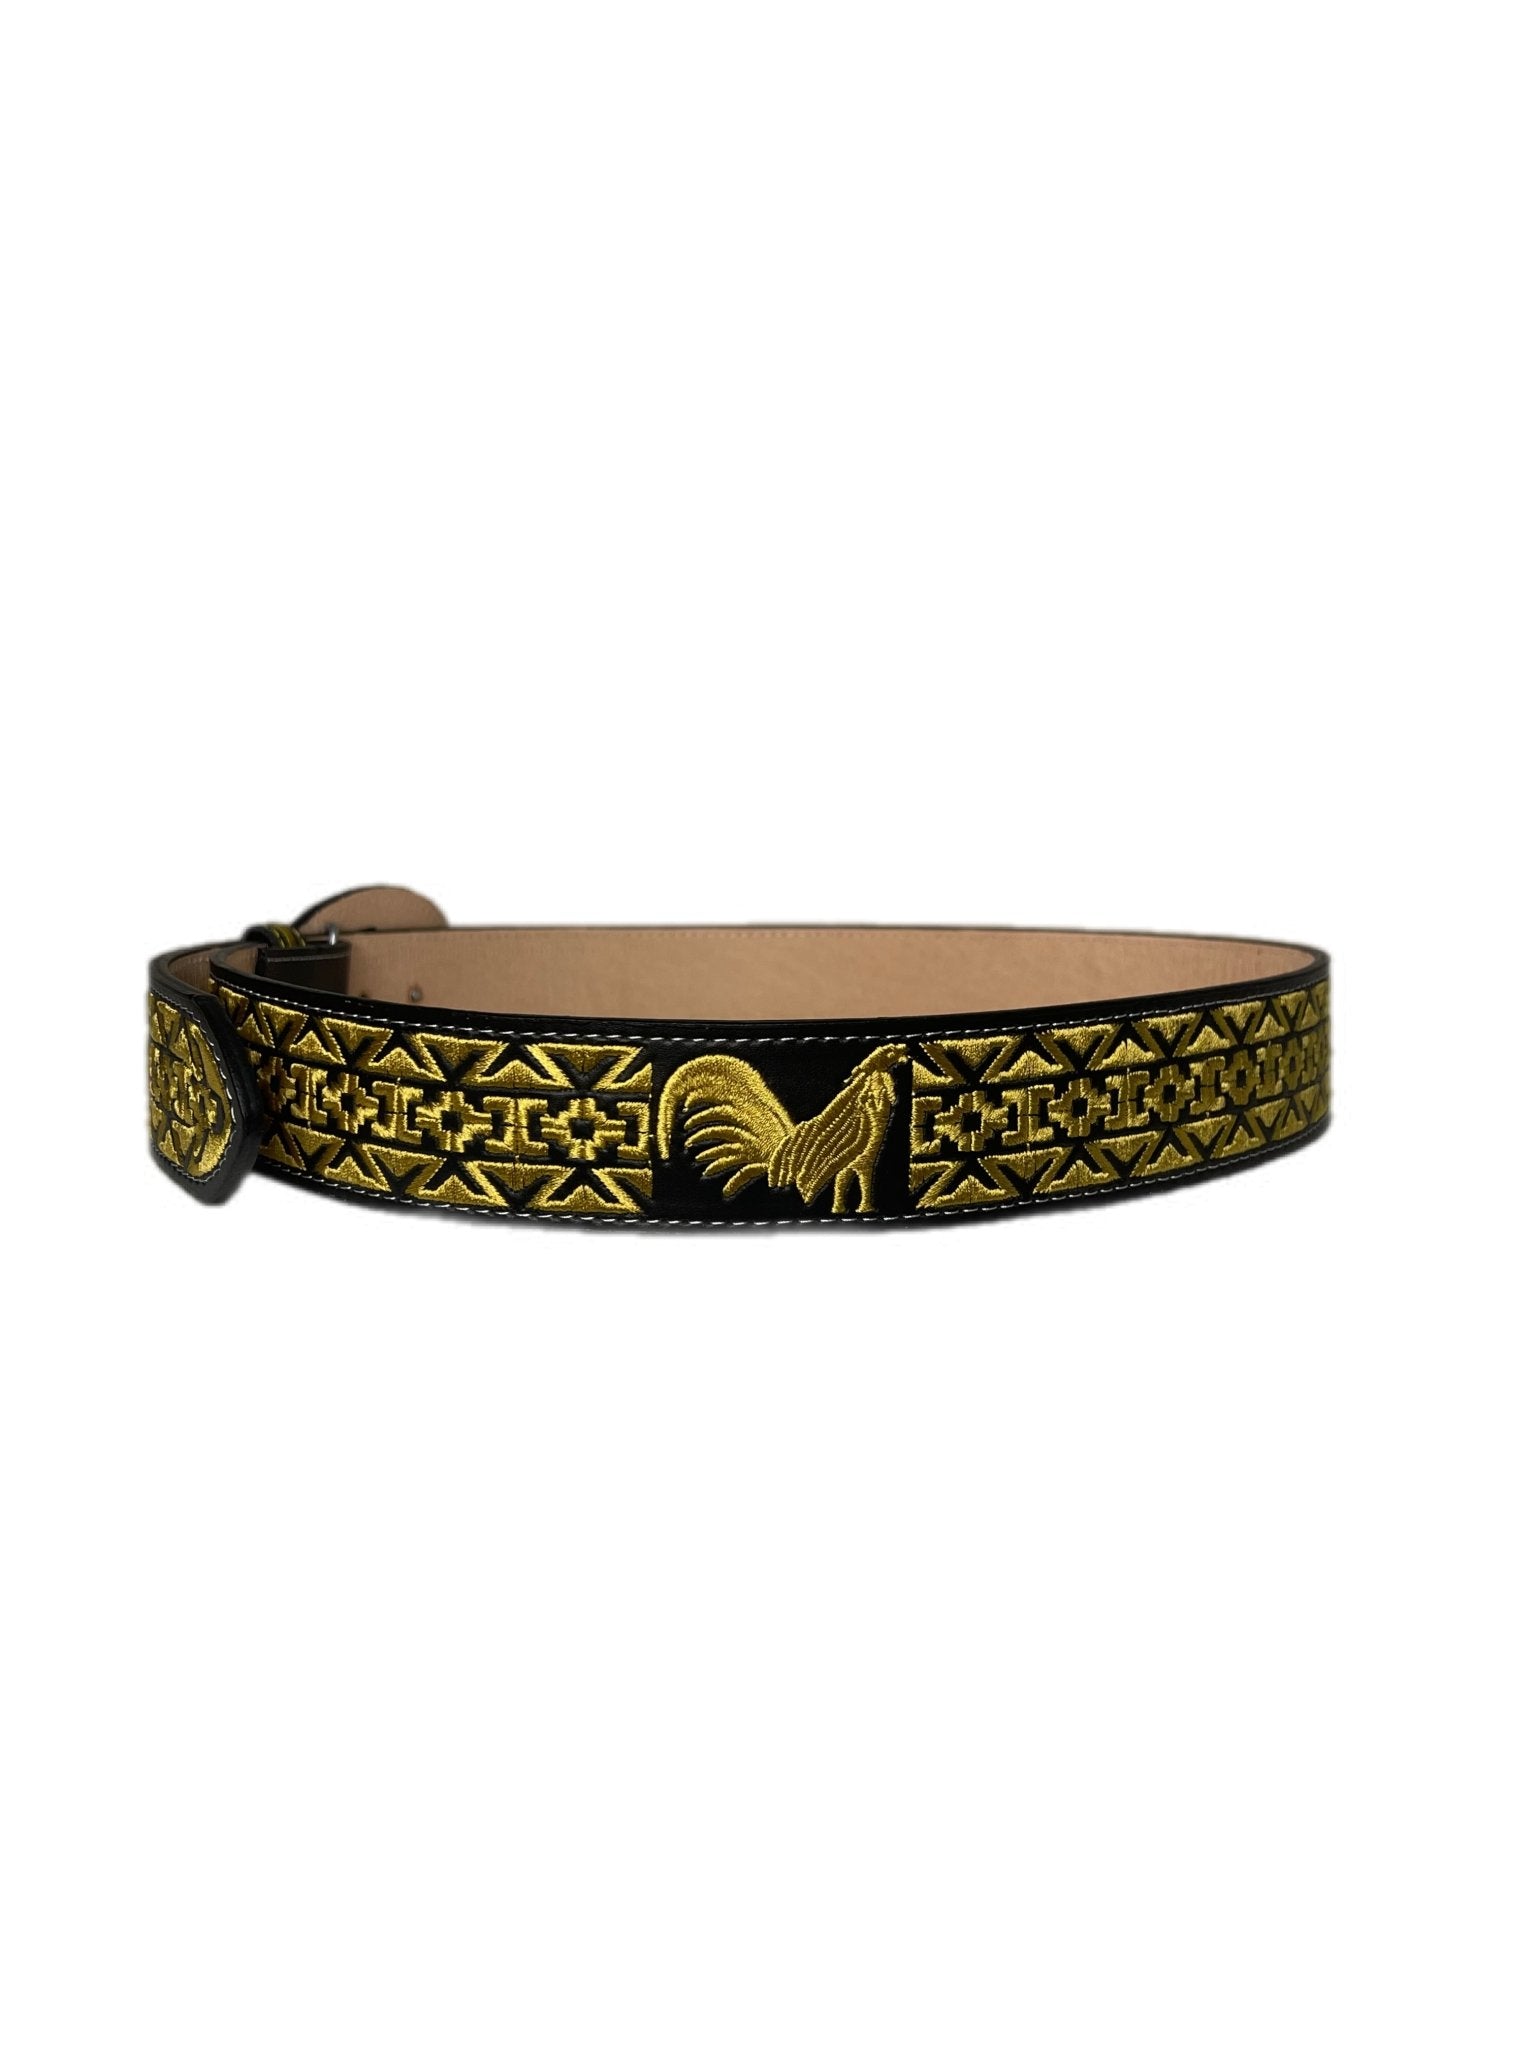 Black And Yellow Roster Textured Belt - Frontera Western Wear